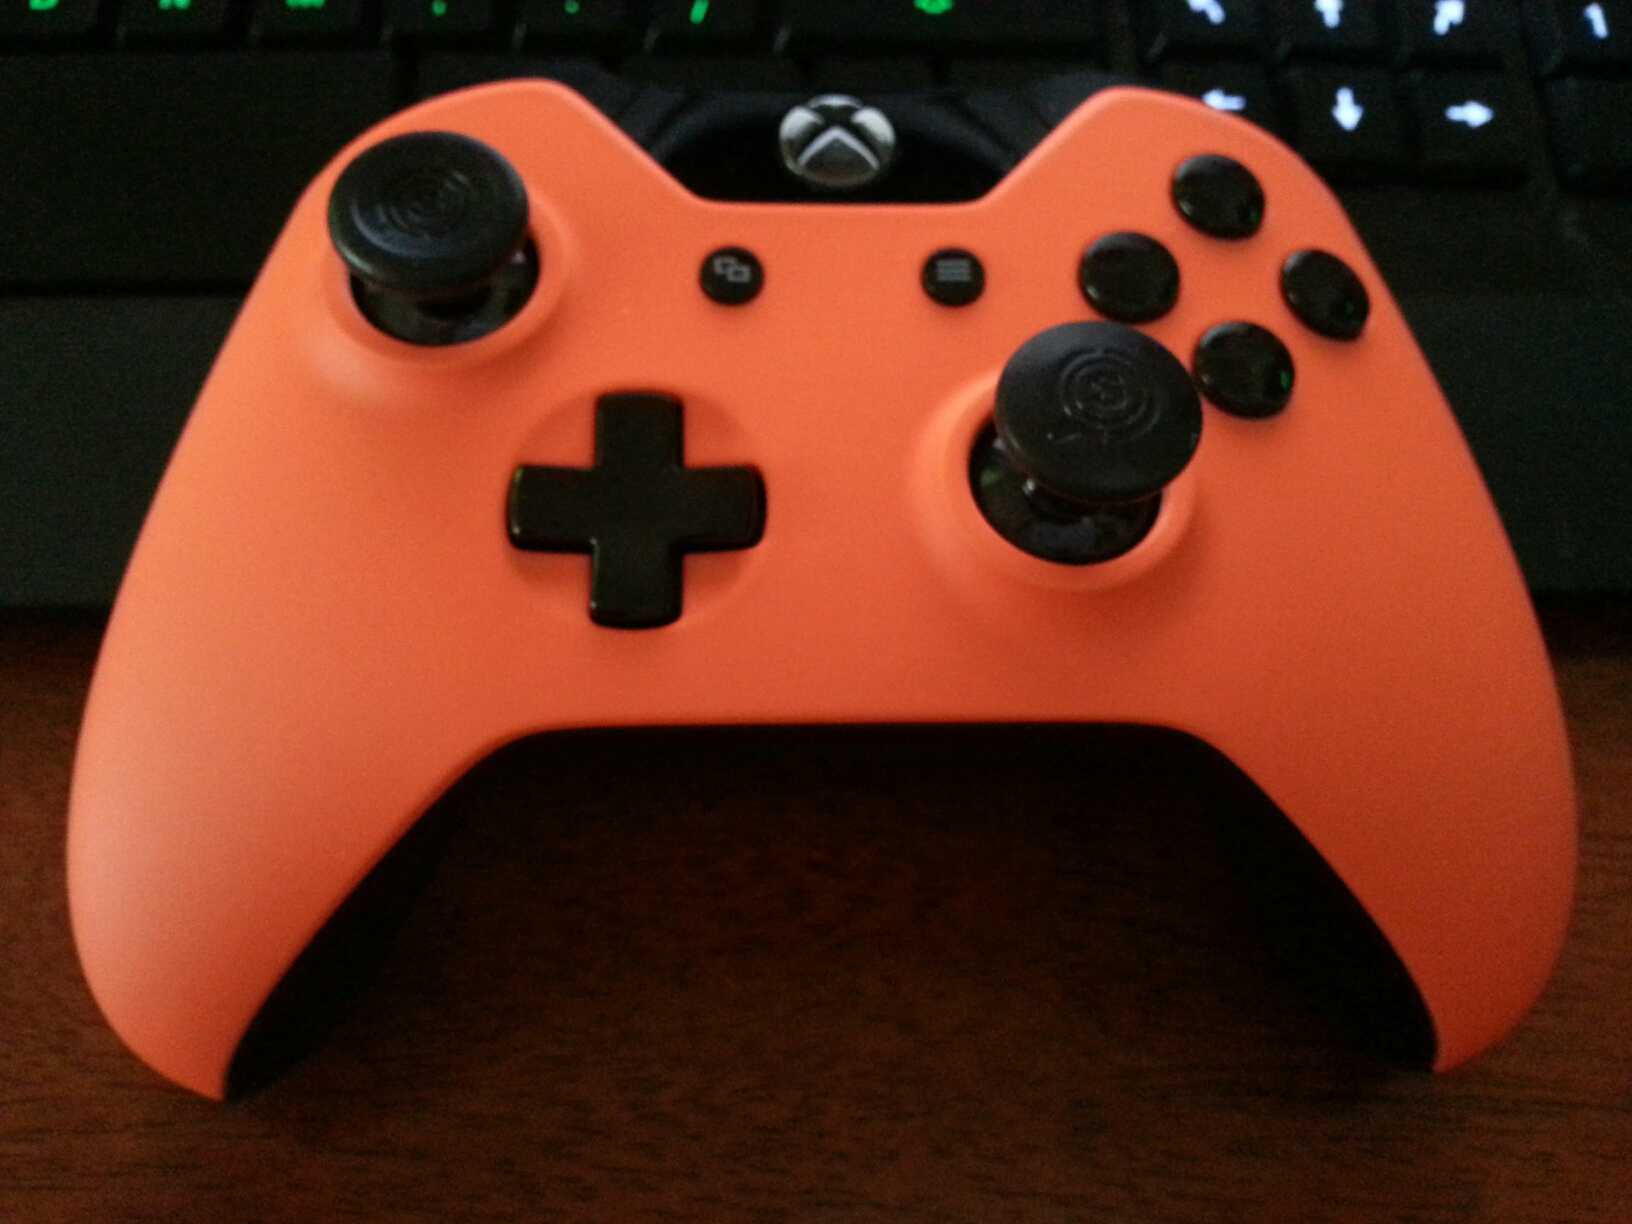 Geek insider, geekinsider, geekinsider. Com,, scuf gaming 'scuf one' xbox one controller review, gaming